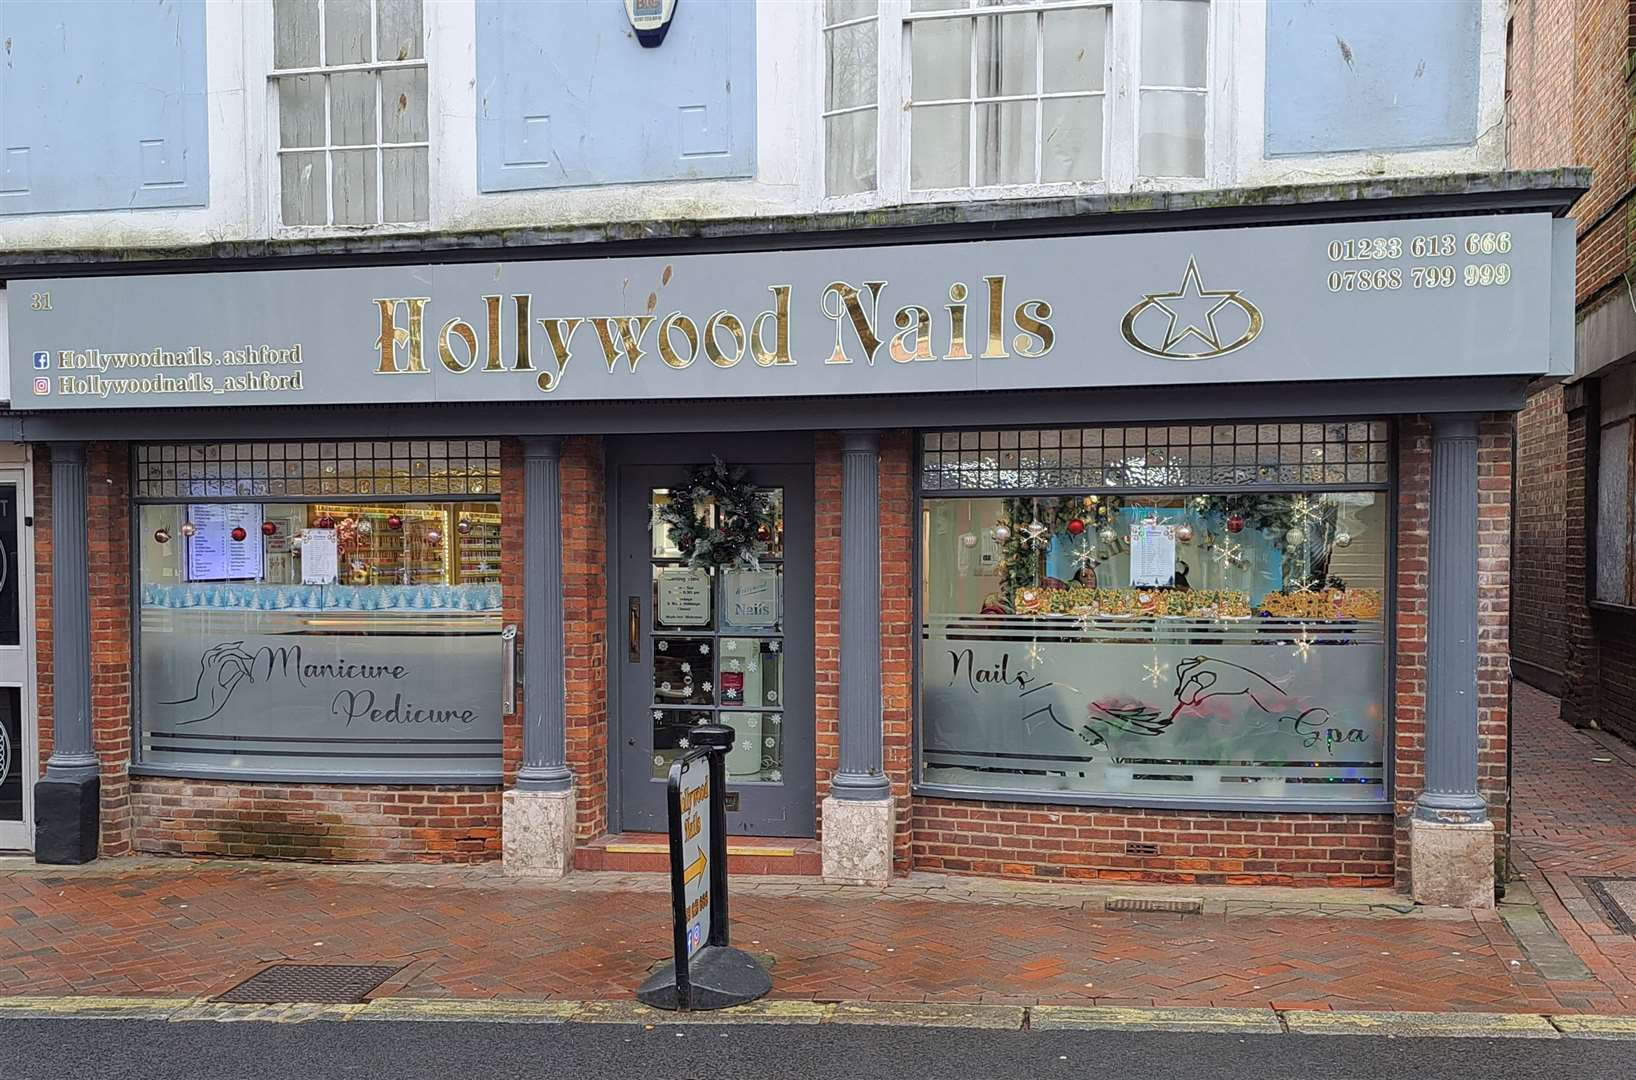 Twelve other beauty salons exist in Ashford town centre, including Hollywood Nails in Lower High Street